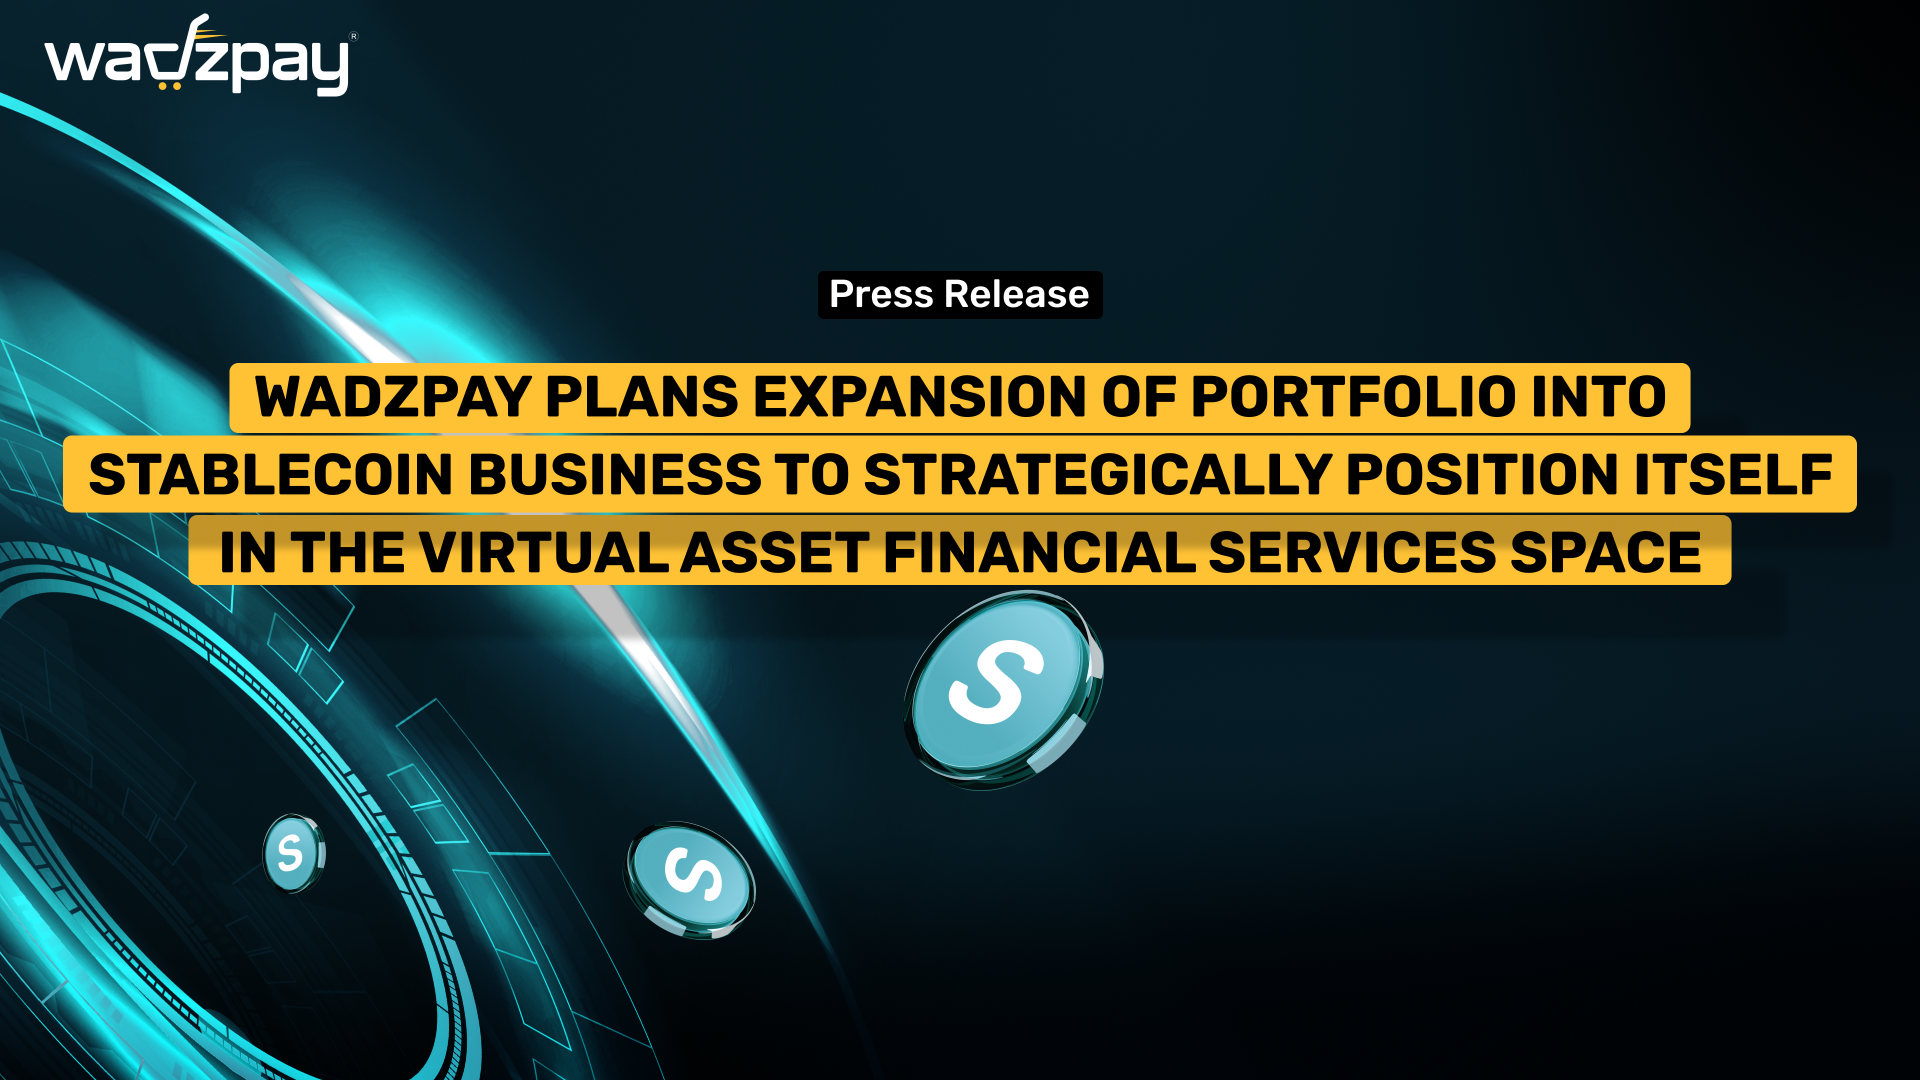 WadzPay, a leading fintech company specialising in blockchain based technology for virtual asset payment solutions, is proud to announce its plan to enter the Stablecoin business, marking a significant expansion of its offerings. With a steadfast commitment to innovation and addressing evolving market demands, the company has strategically positioned itself to capitalise on the growing opportunities within the virtual asset financial services space.